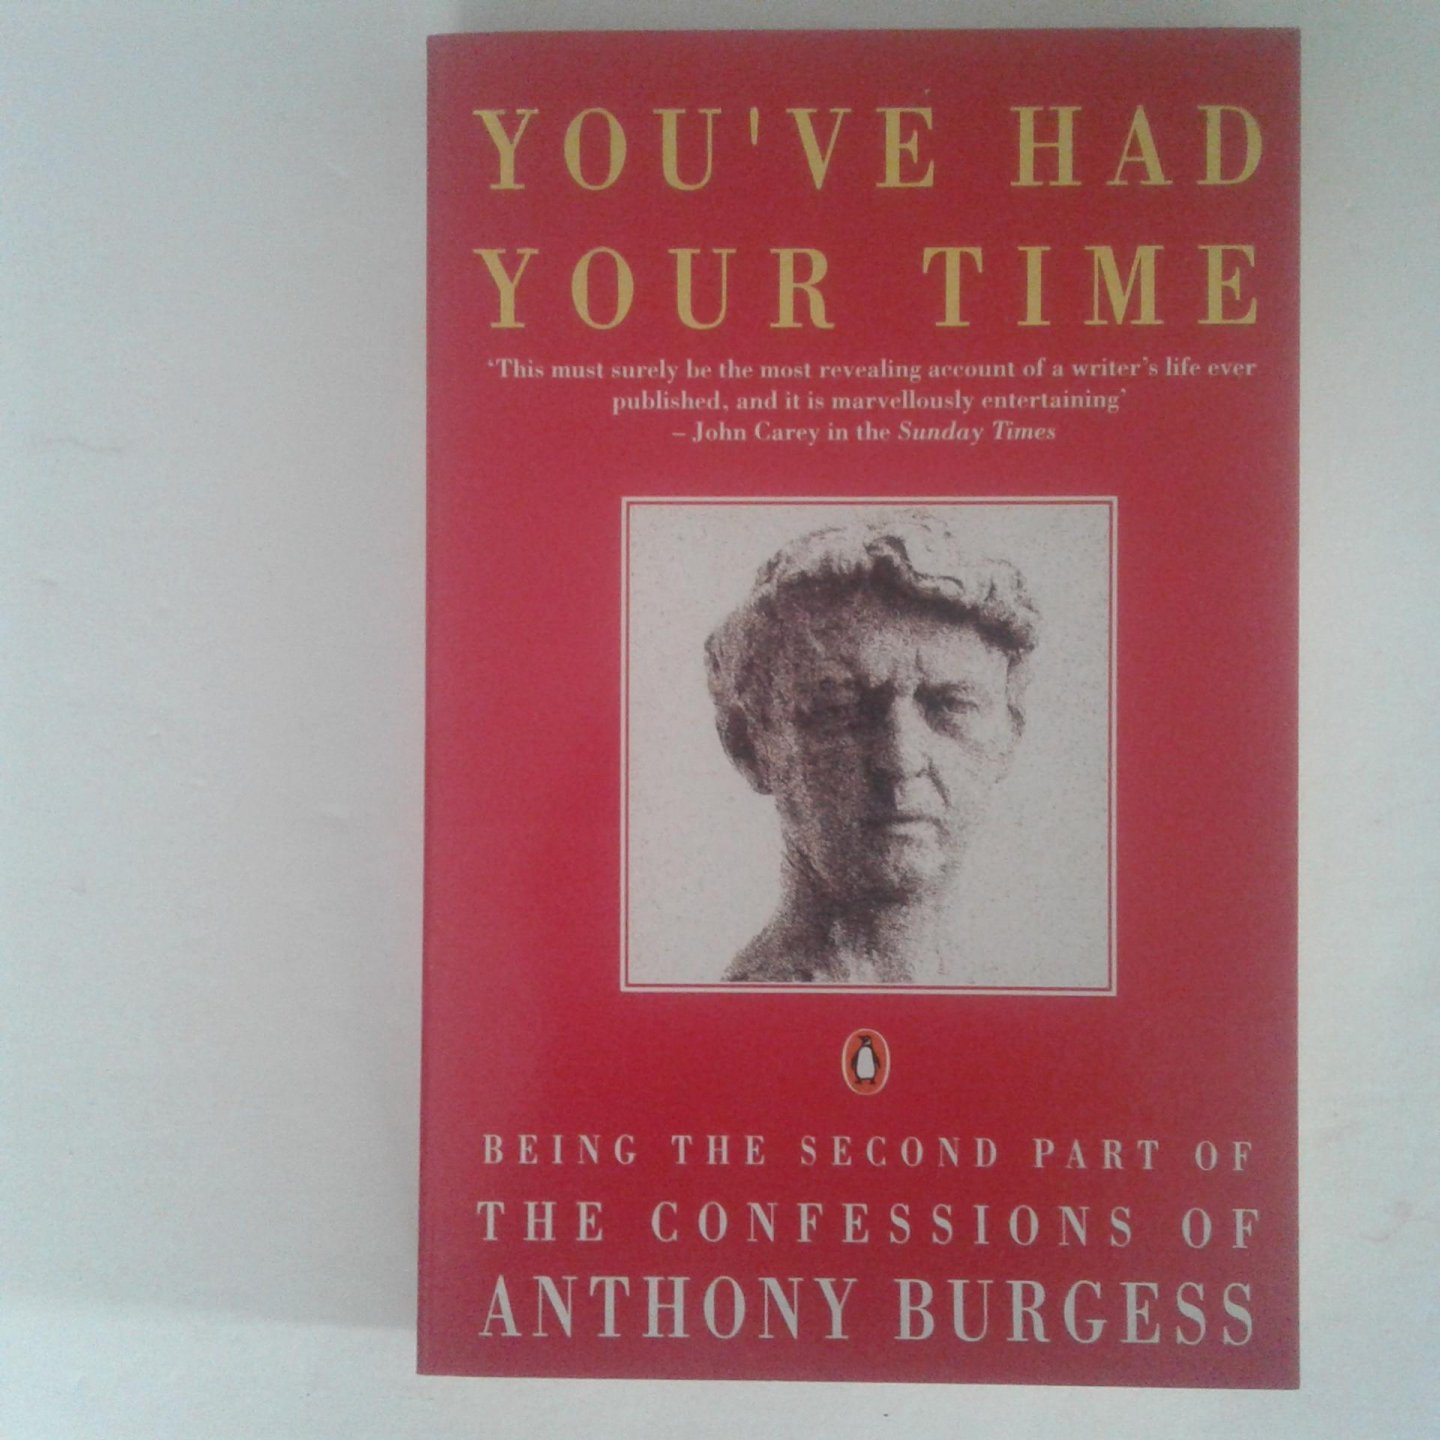 Burgess, Anthony - You've had your time ; Being the second part of the confessions of Anthony Burgess